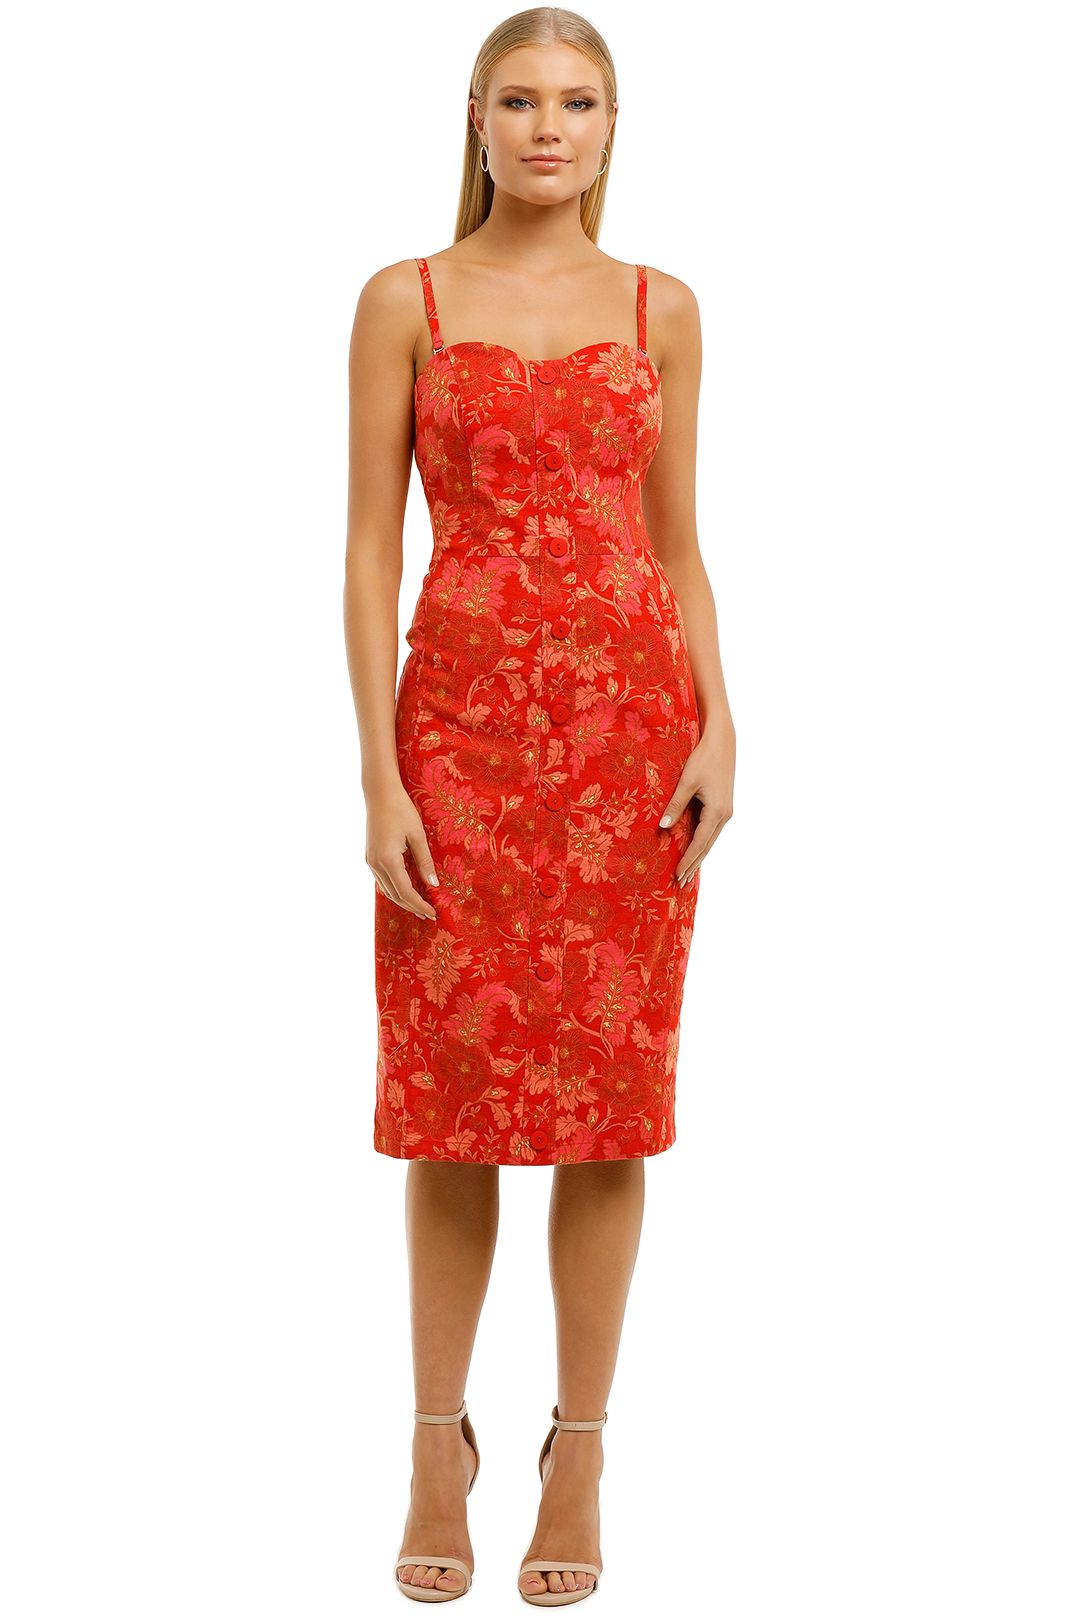 Ministry-of-Style-Hibiscus-Strapless-Dress-Print -Front